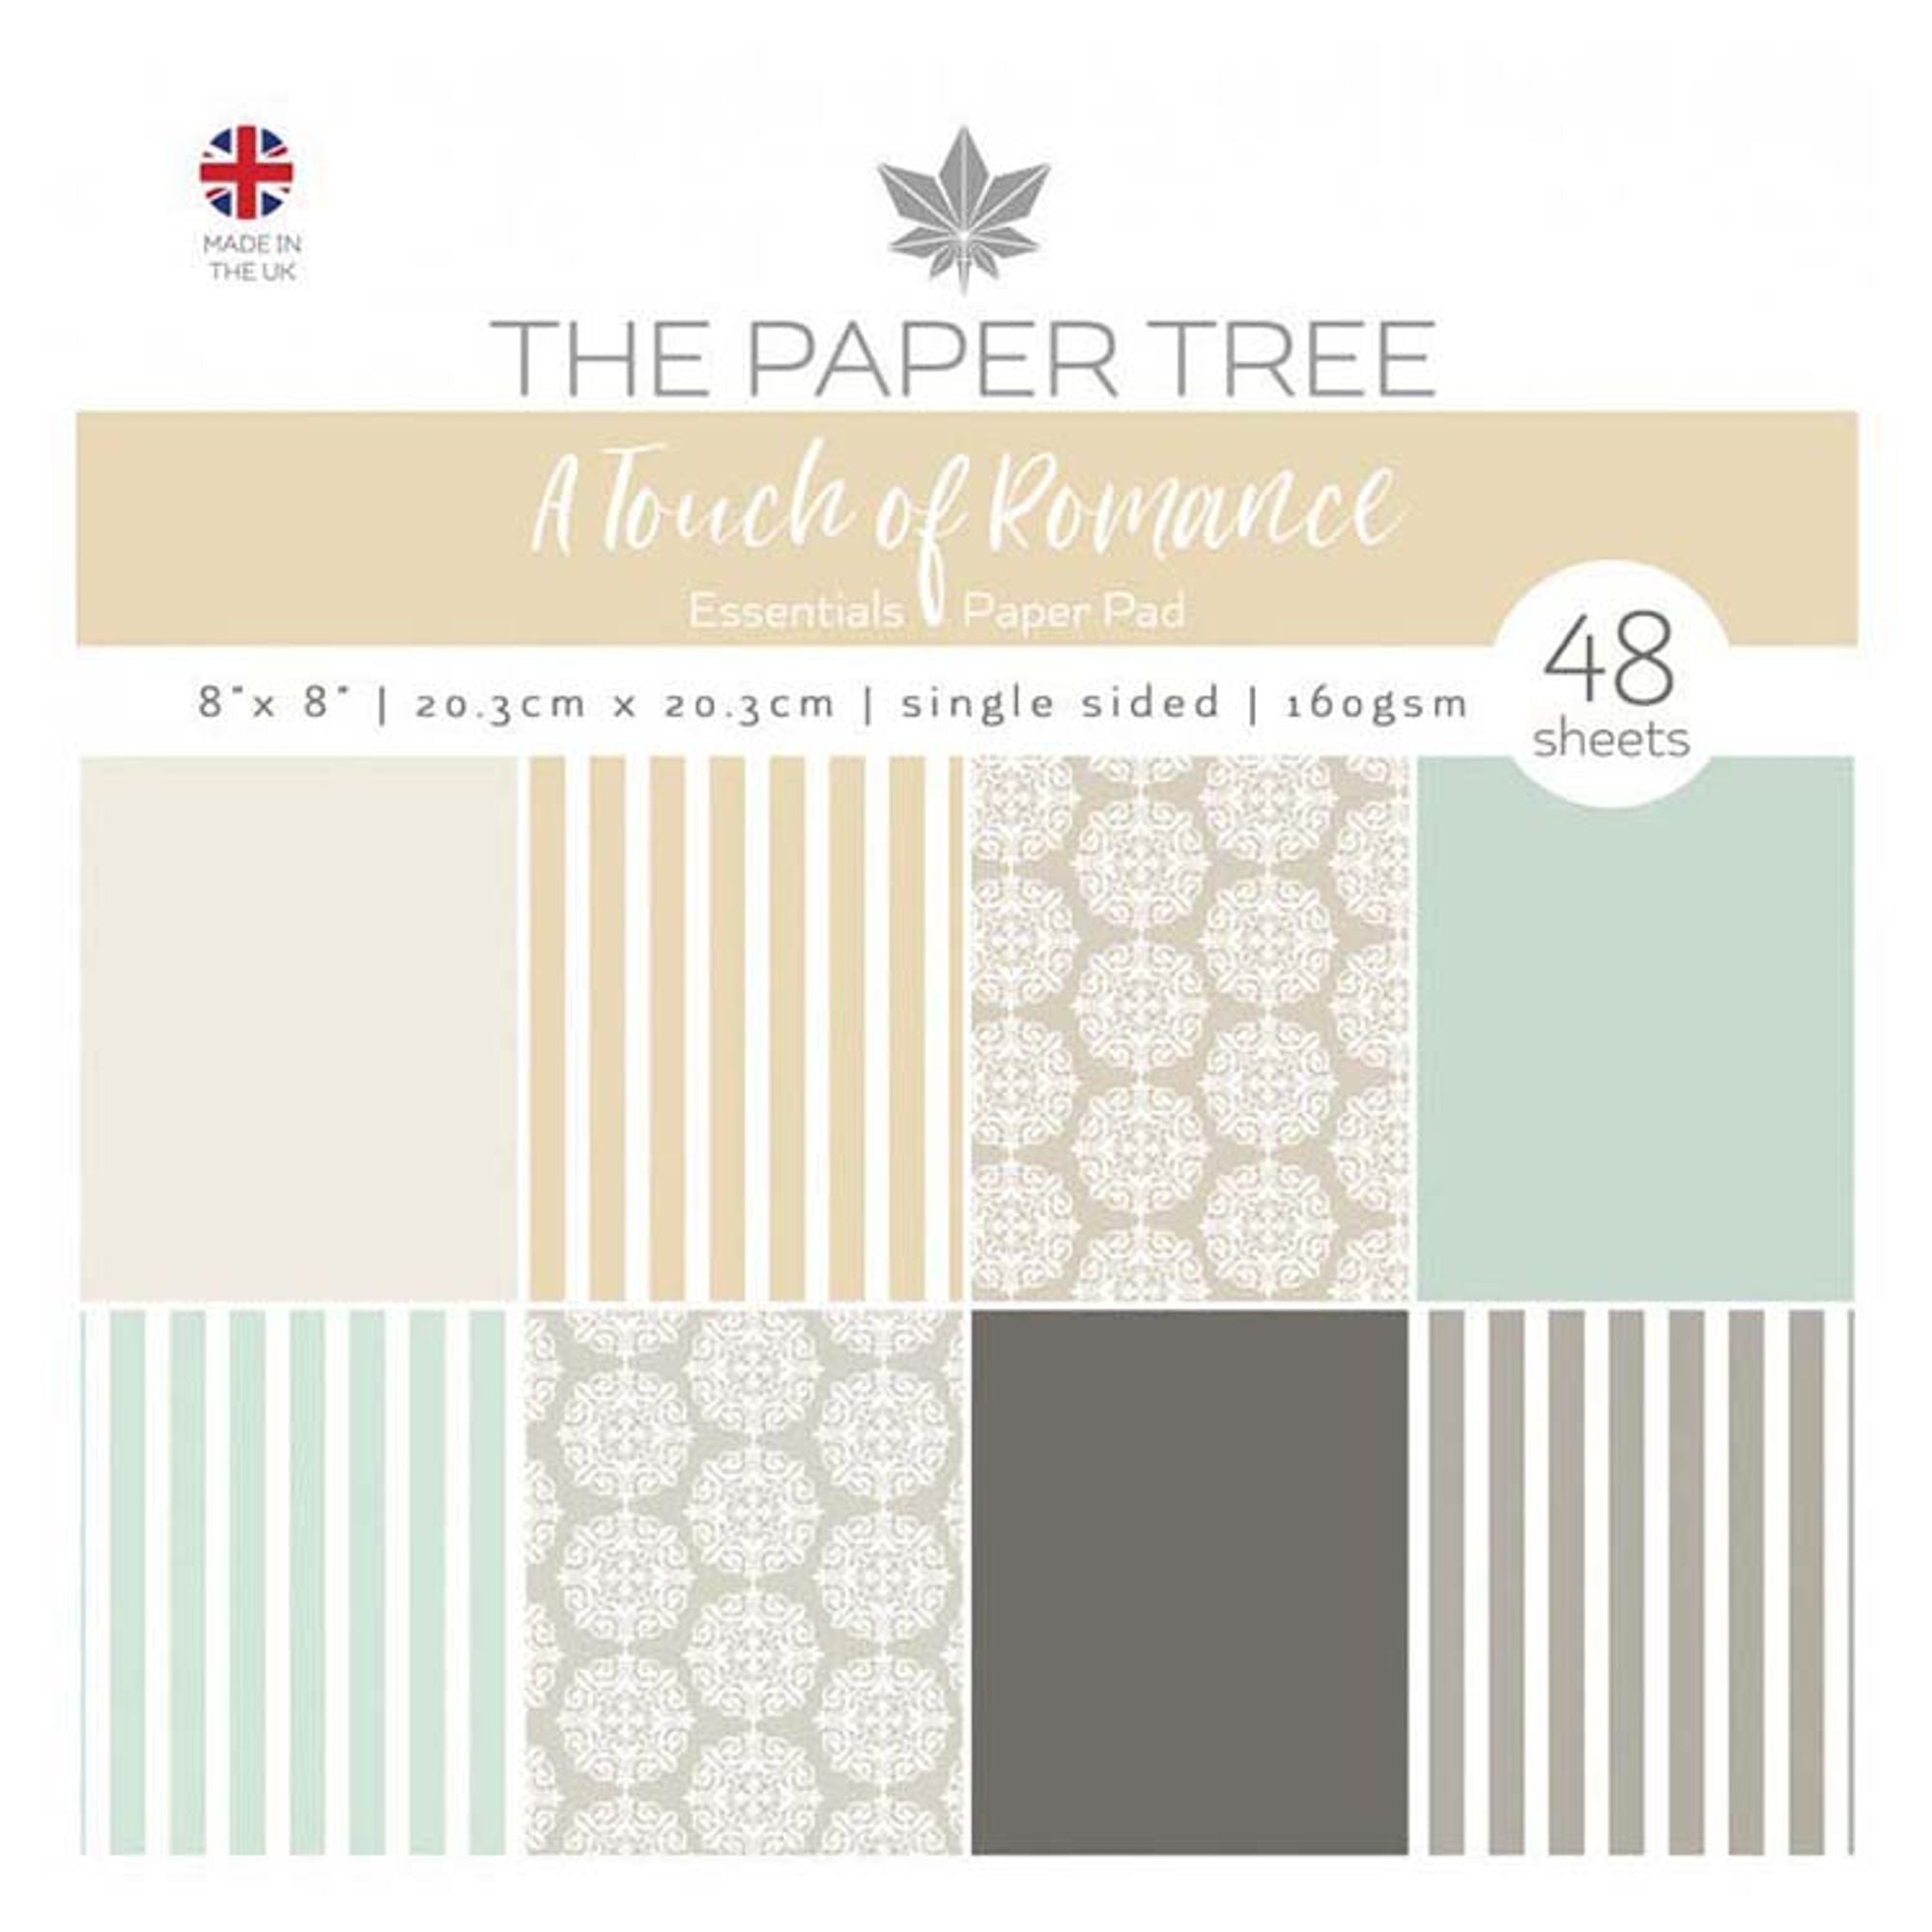 The Paper Tree A Touch of Romance 8x8 Essentials Pad